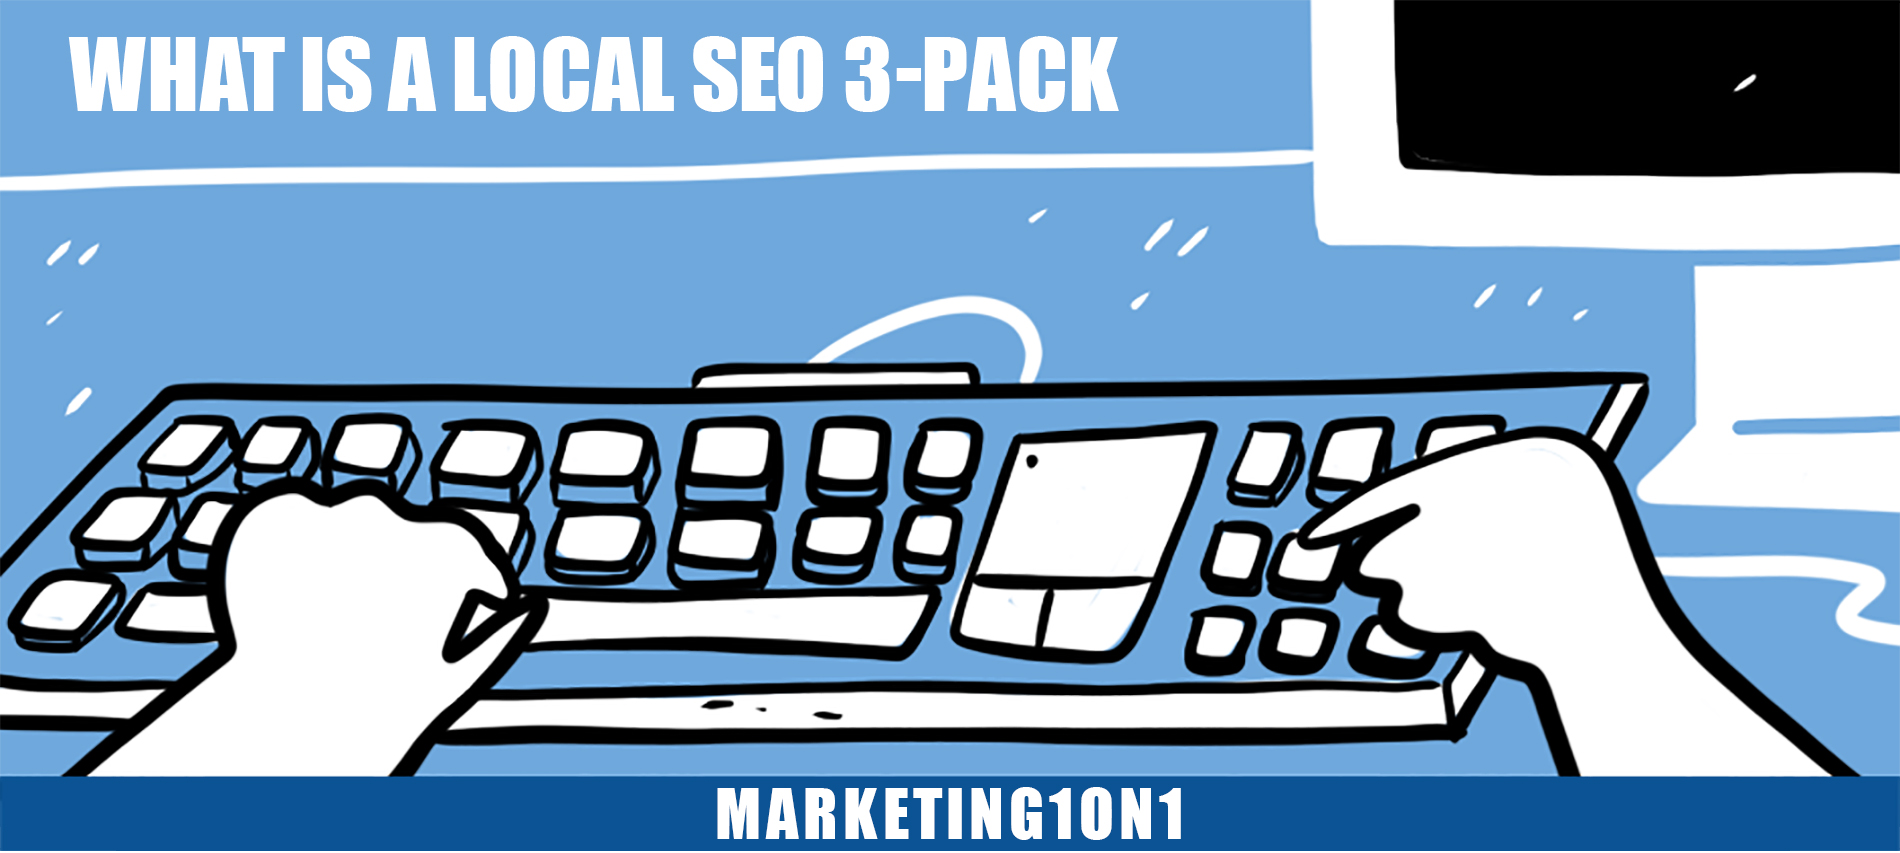 What is a local SEO 3-pack?